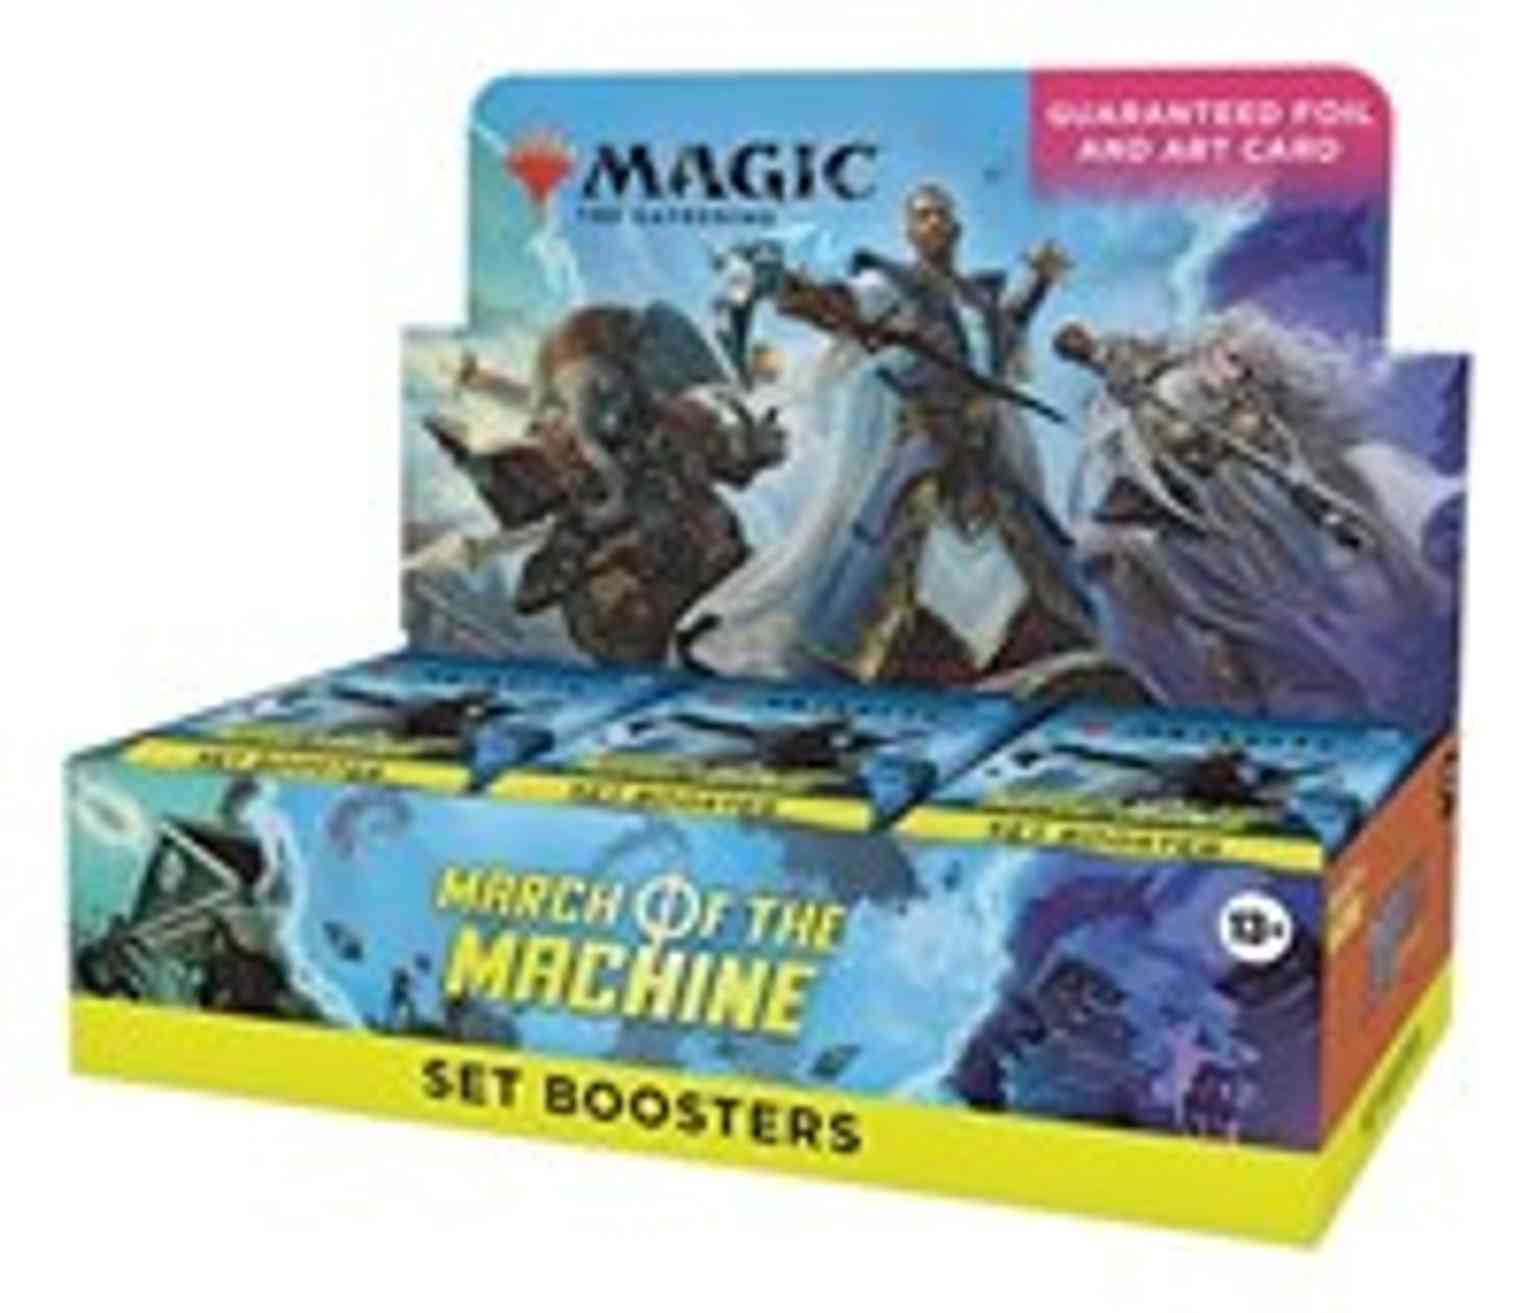 March of the Machine - Set Booster Display magic card front